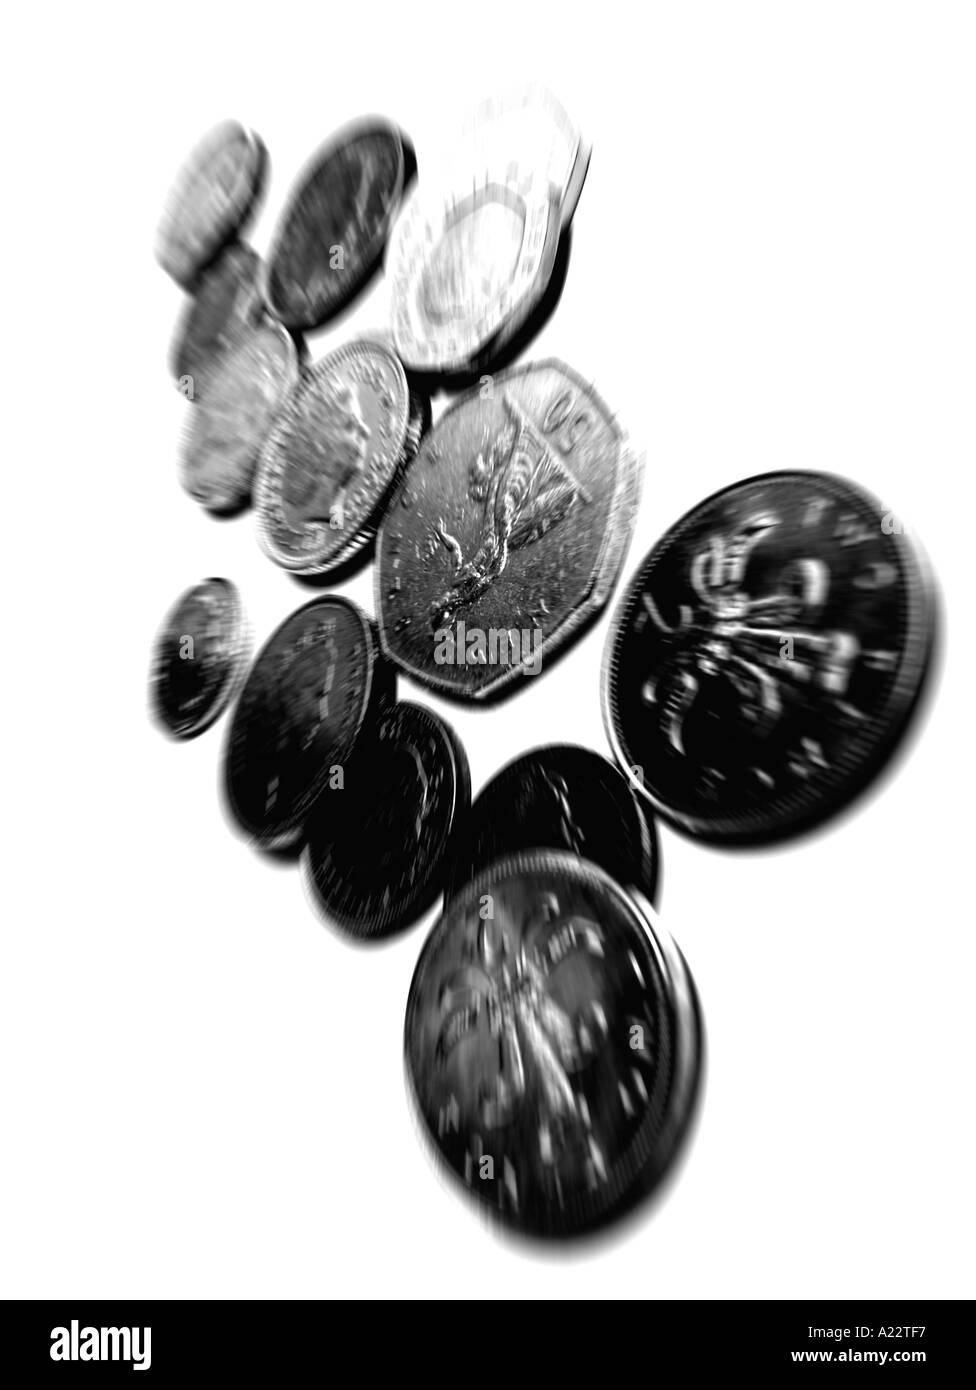 English currency coins Stock Photo